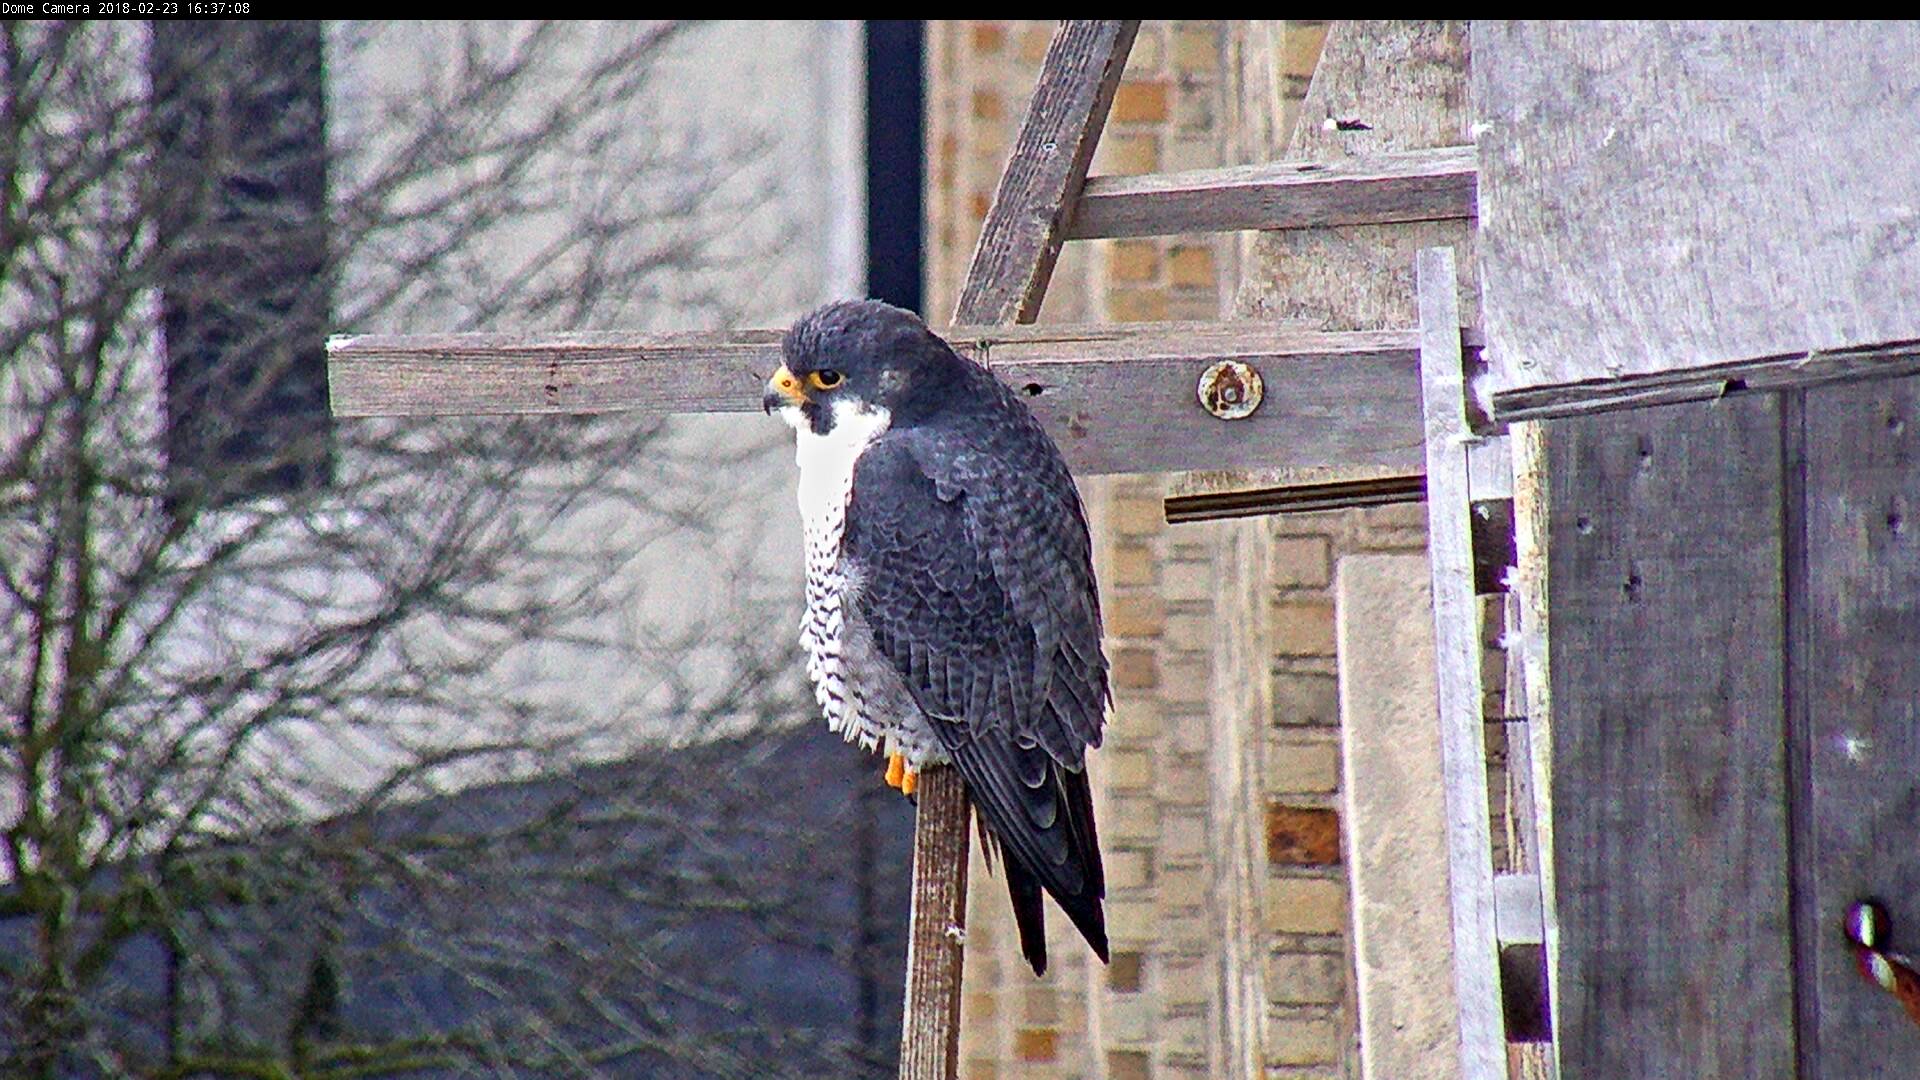 Ares spent much of the day manning the nest box